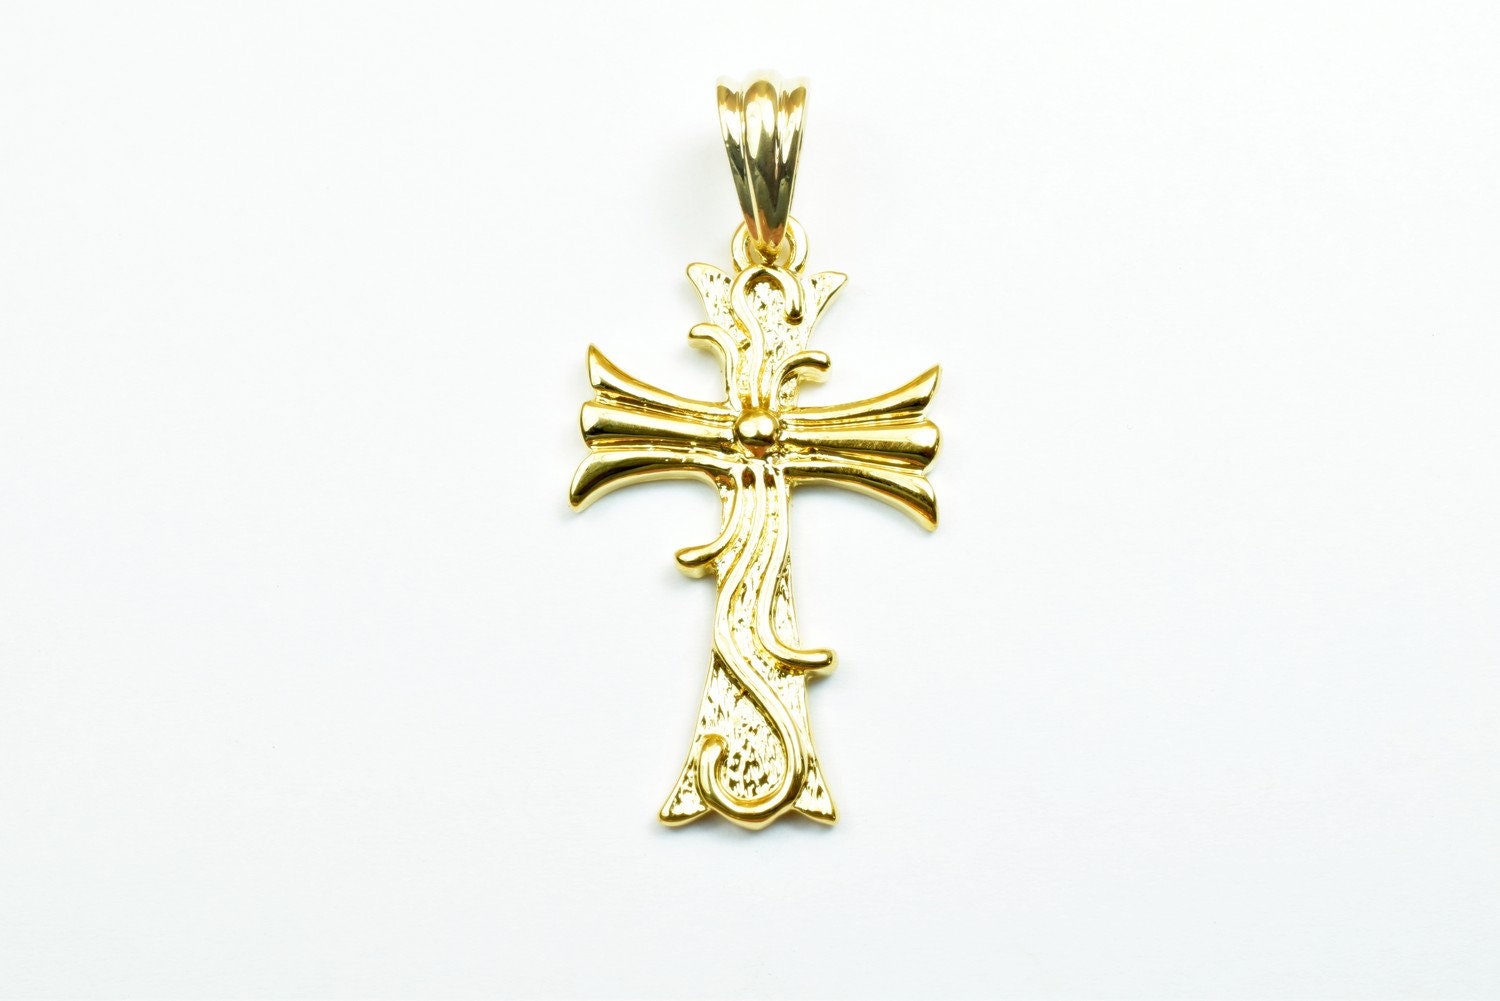 18K as Gold Filled* Cross Pendants Size 38x22mm, Christian Religious Cross Charm, First Communion Baby Baptism For Jewelry Making